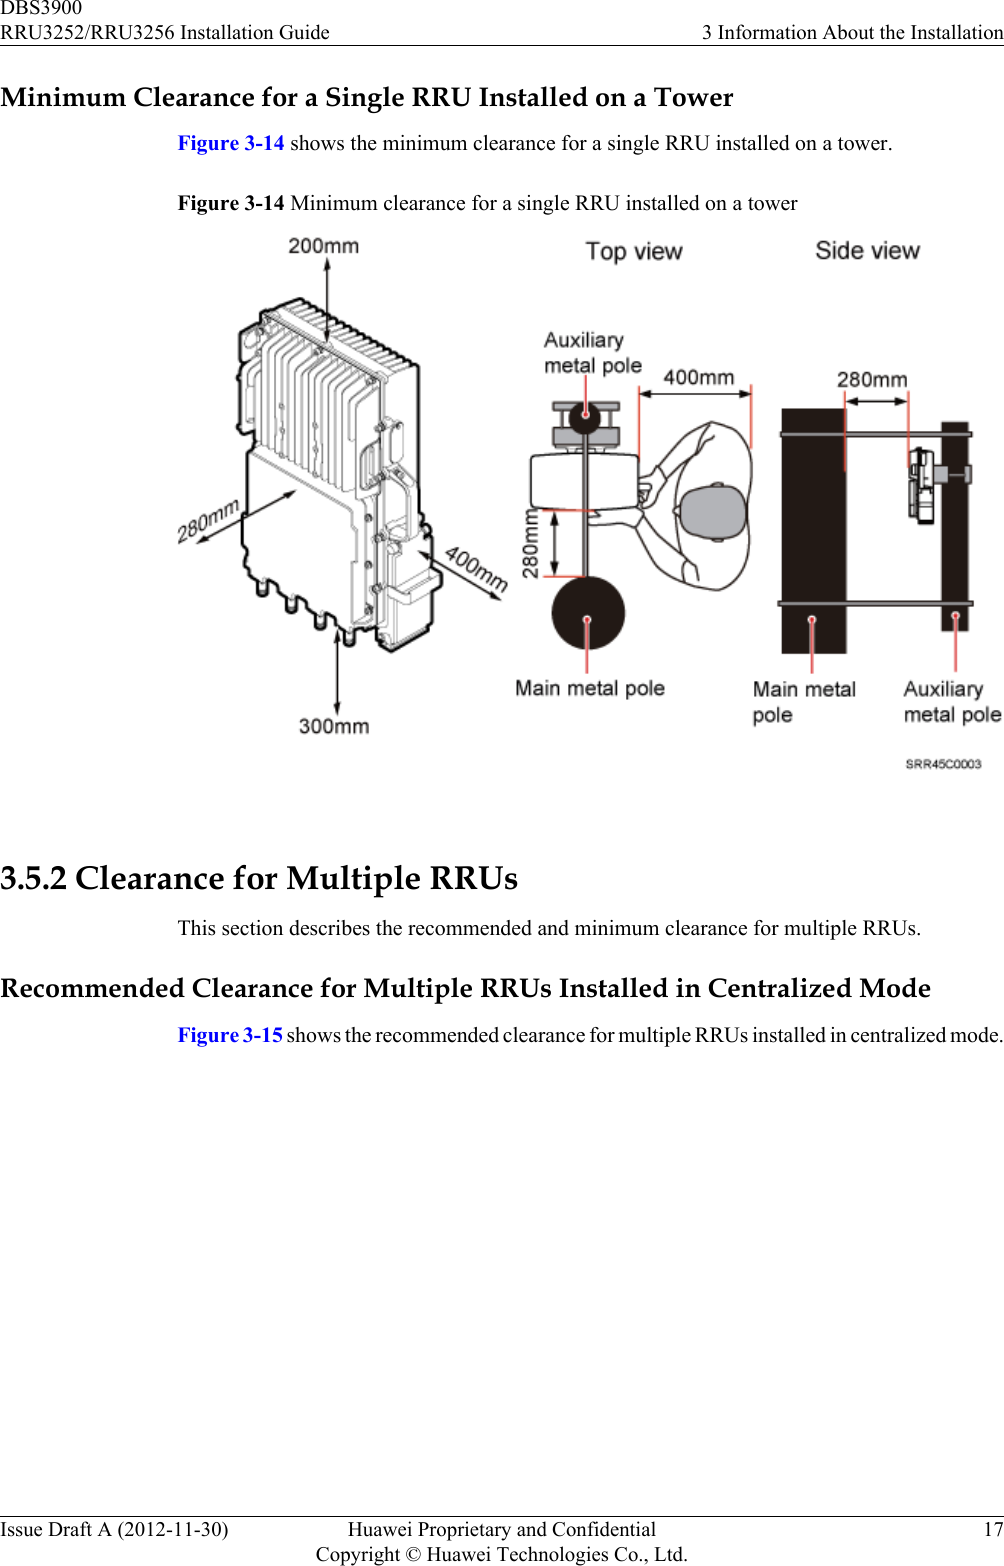 Minimum Clearance for a Single RRU Installed on a TowerFigure 3-14 shows the minimum clearance for a single RRU installed on a tower.Figure 3-14 Minimum clearance for a single RRU installed on a tower 3.5.2 Clearance for Multiple RRUsThis section describes the recommended and minimum clearance for multiple RRUs.Recommended Clearance for Multiple RRUs Installed in Centralized ModeFigure 3-15 shows the recommended clearance for multiple RRUs installed in centralized mode.DBS3900RRU3252/RRU3256 Installation Guide 3 Information About the InstallationIssue Draft A (2012-11-30) Huawei Proprietary and ConfidentialCopyright © Huawei Technologies Co., Ltd.17